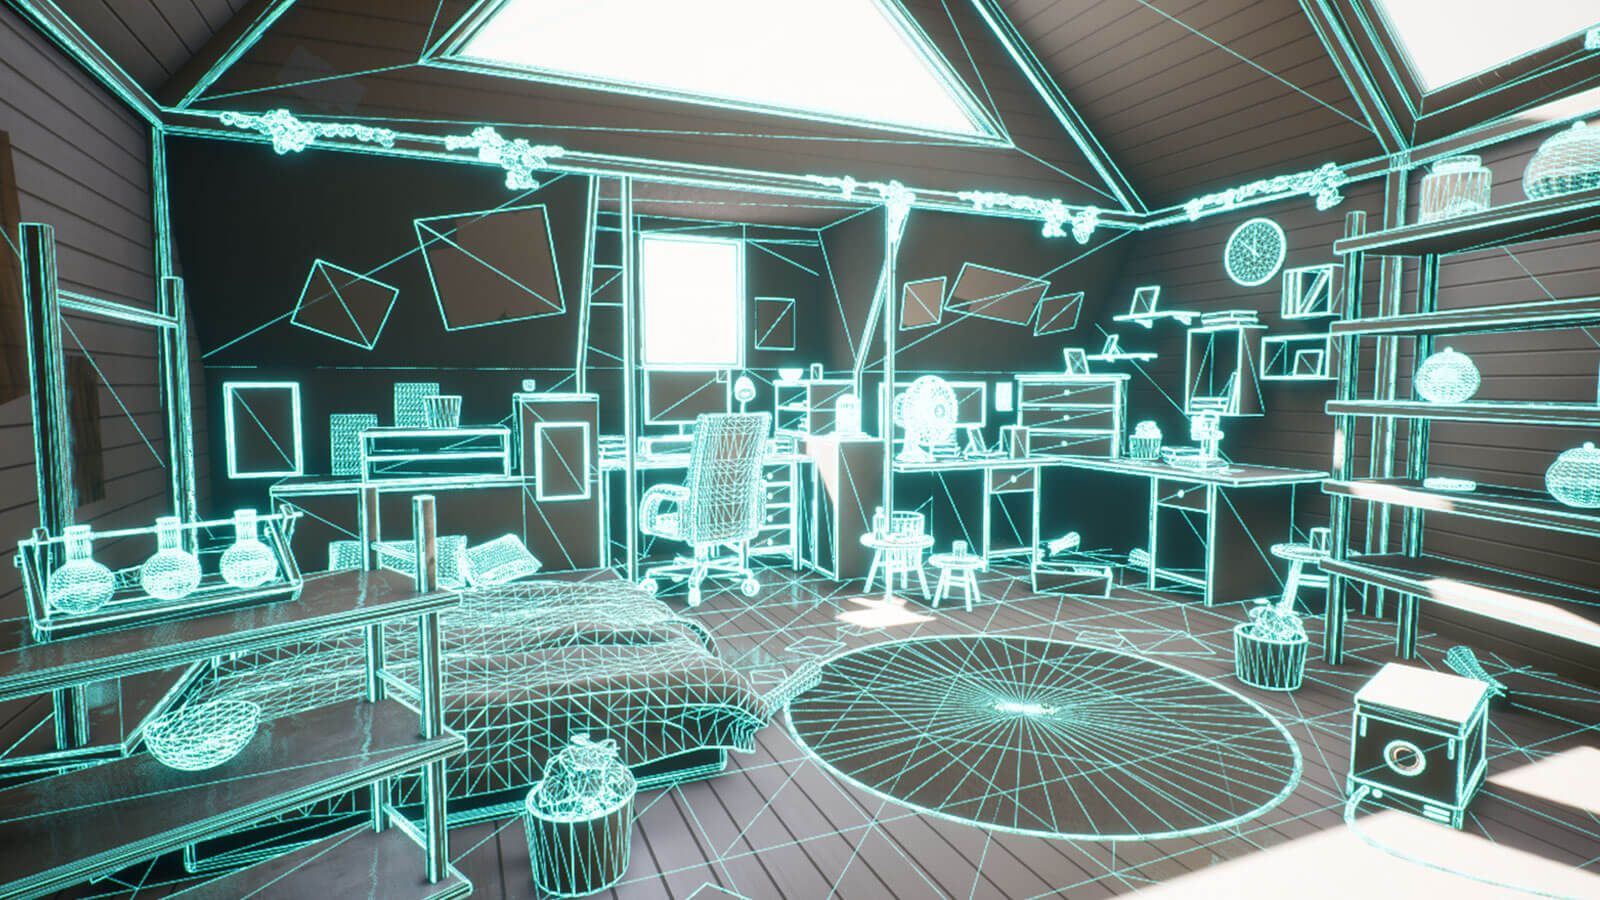 In-engine view of all 3D objects outlined in a bright blue inside the room